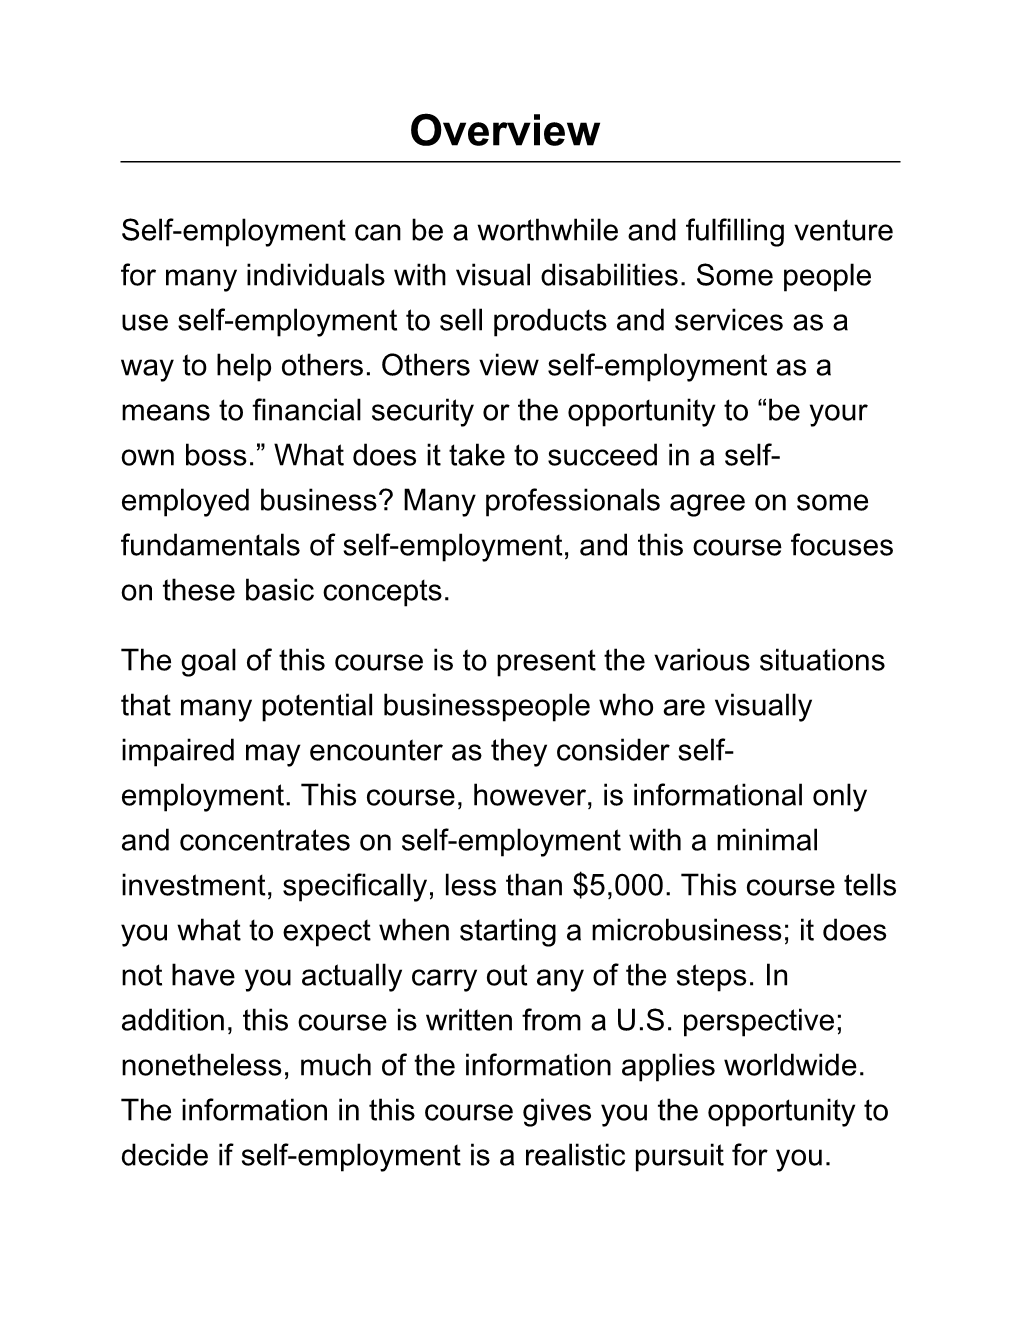 Self-Employment Can Be a Worthwhile and Fulfilling Venture for Many Individuals with Visual